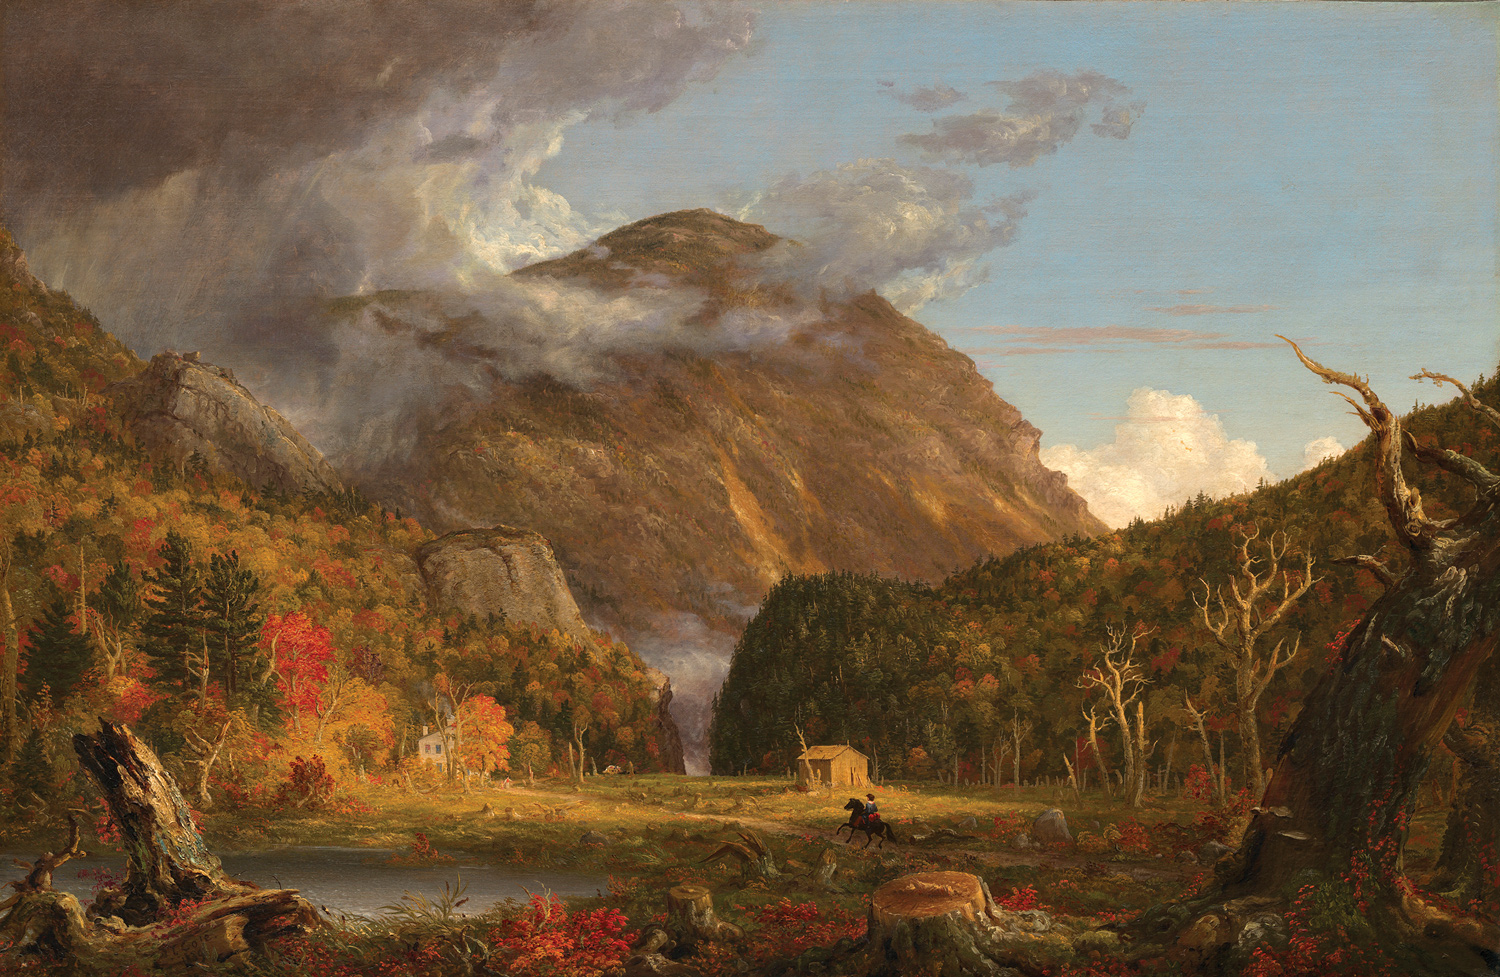 Thomas Cole, <i>A View of the Mountain Pass Called the Notch of the White Mountains</i>, 1839. Oil on canvas, 40 -3/16” x 61 -5/16”. (Courtesy of the National Gallery of Art / Andrew W. Mellon Fund)